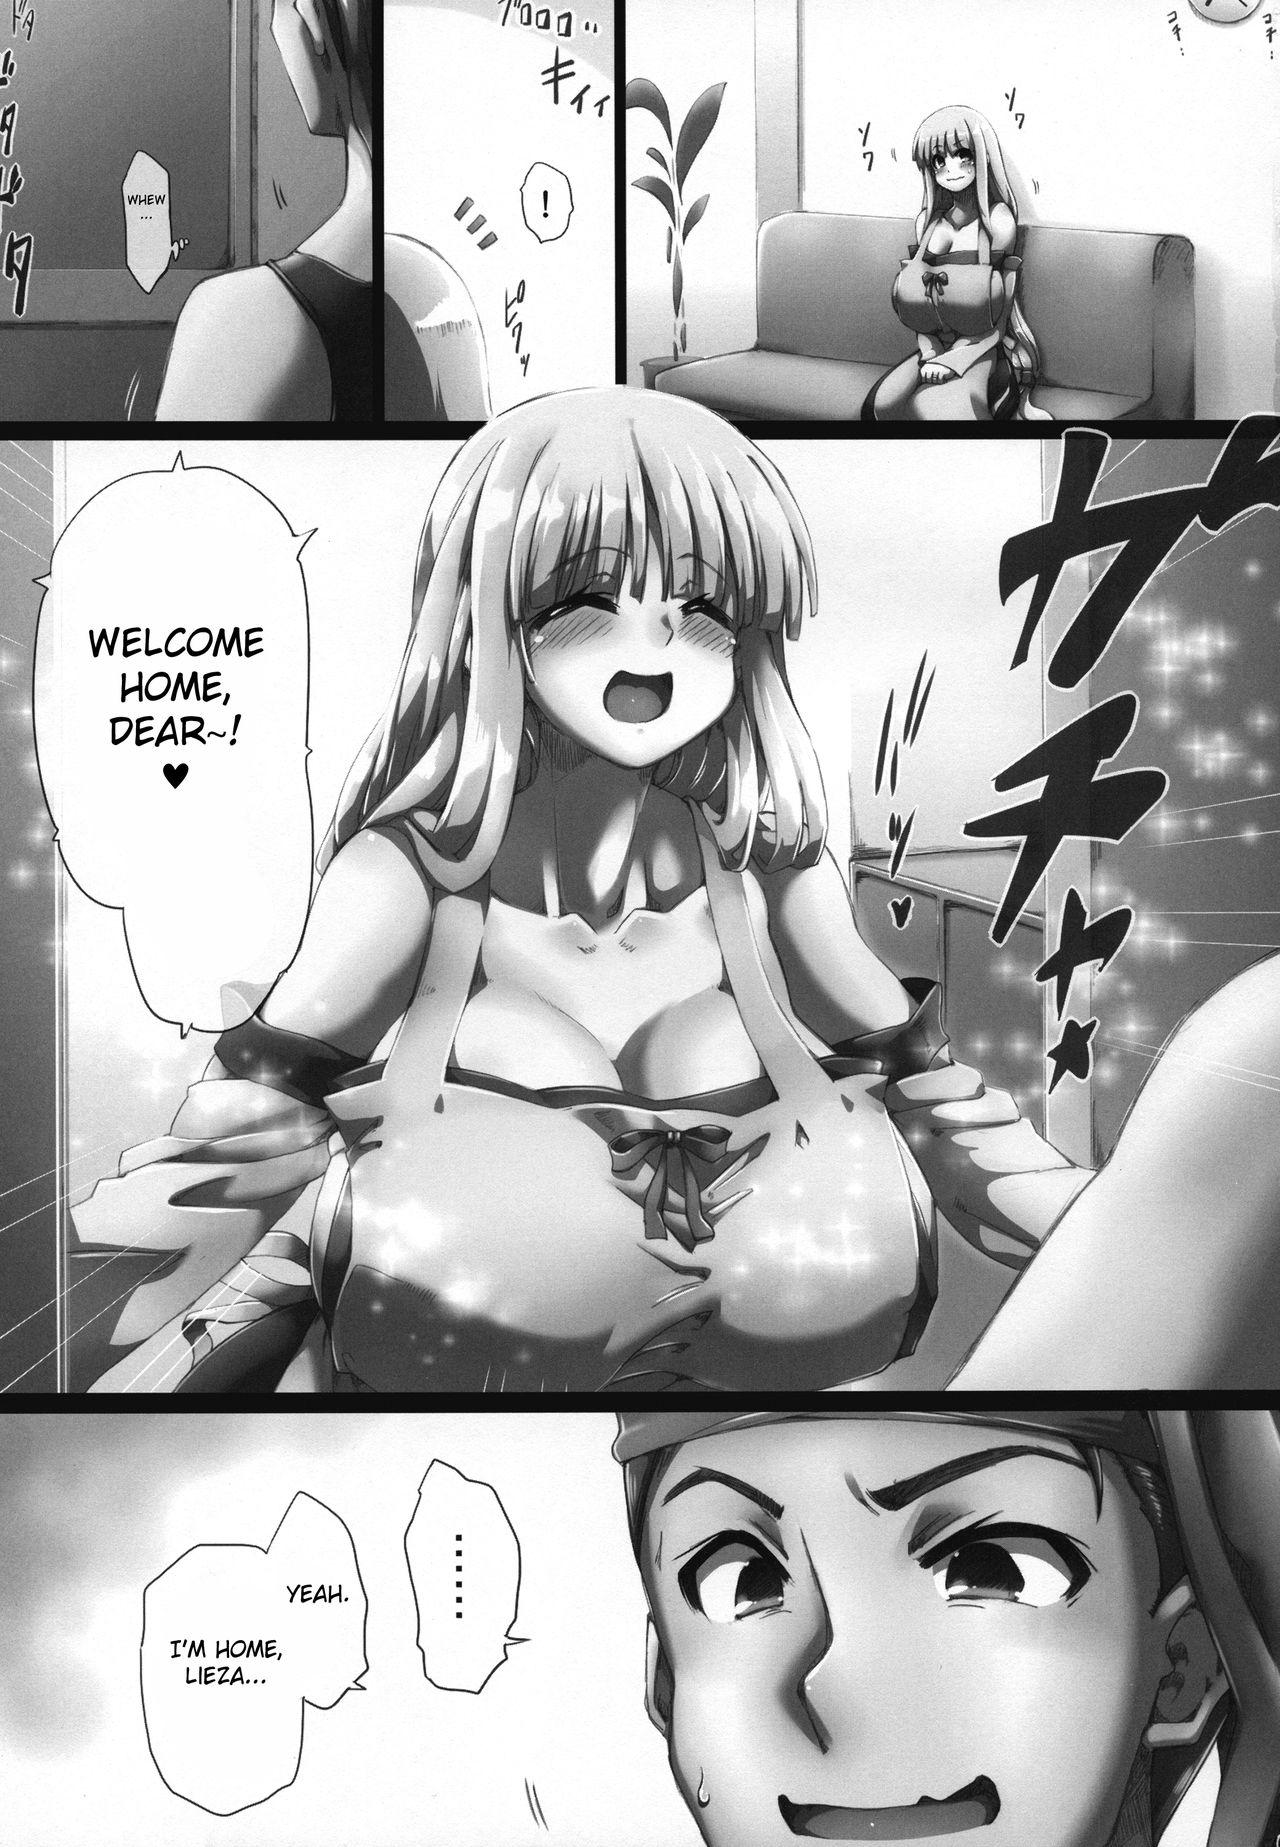 Sola Dream Home - Arc the lad Slapping - Page 5